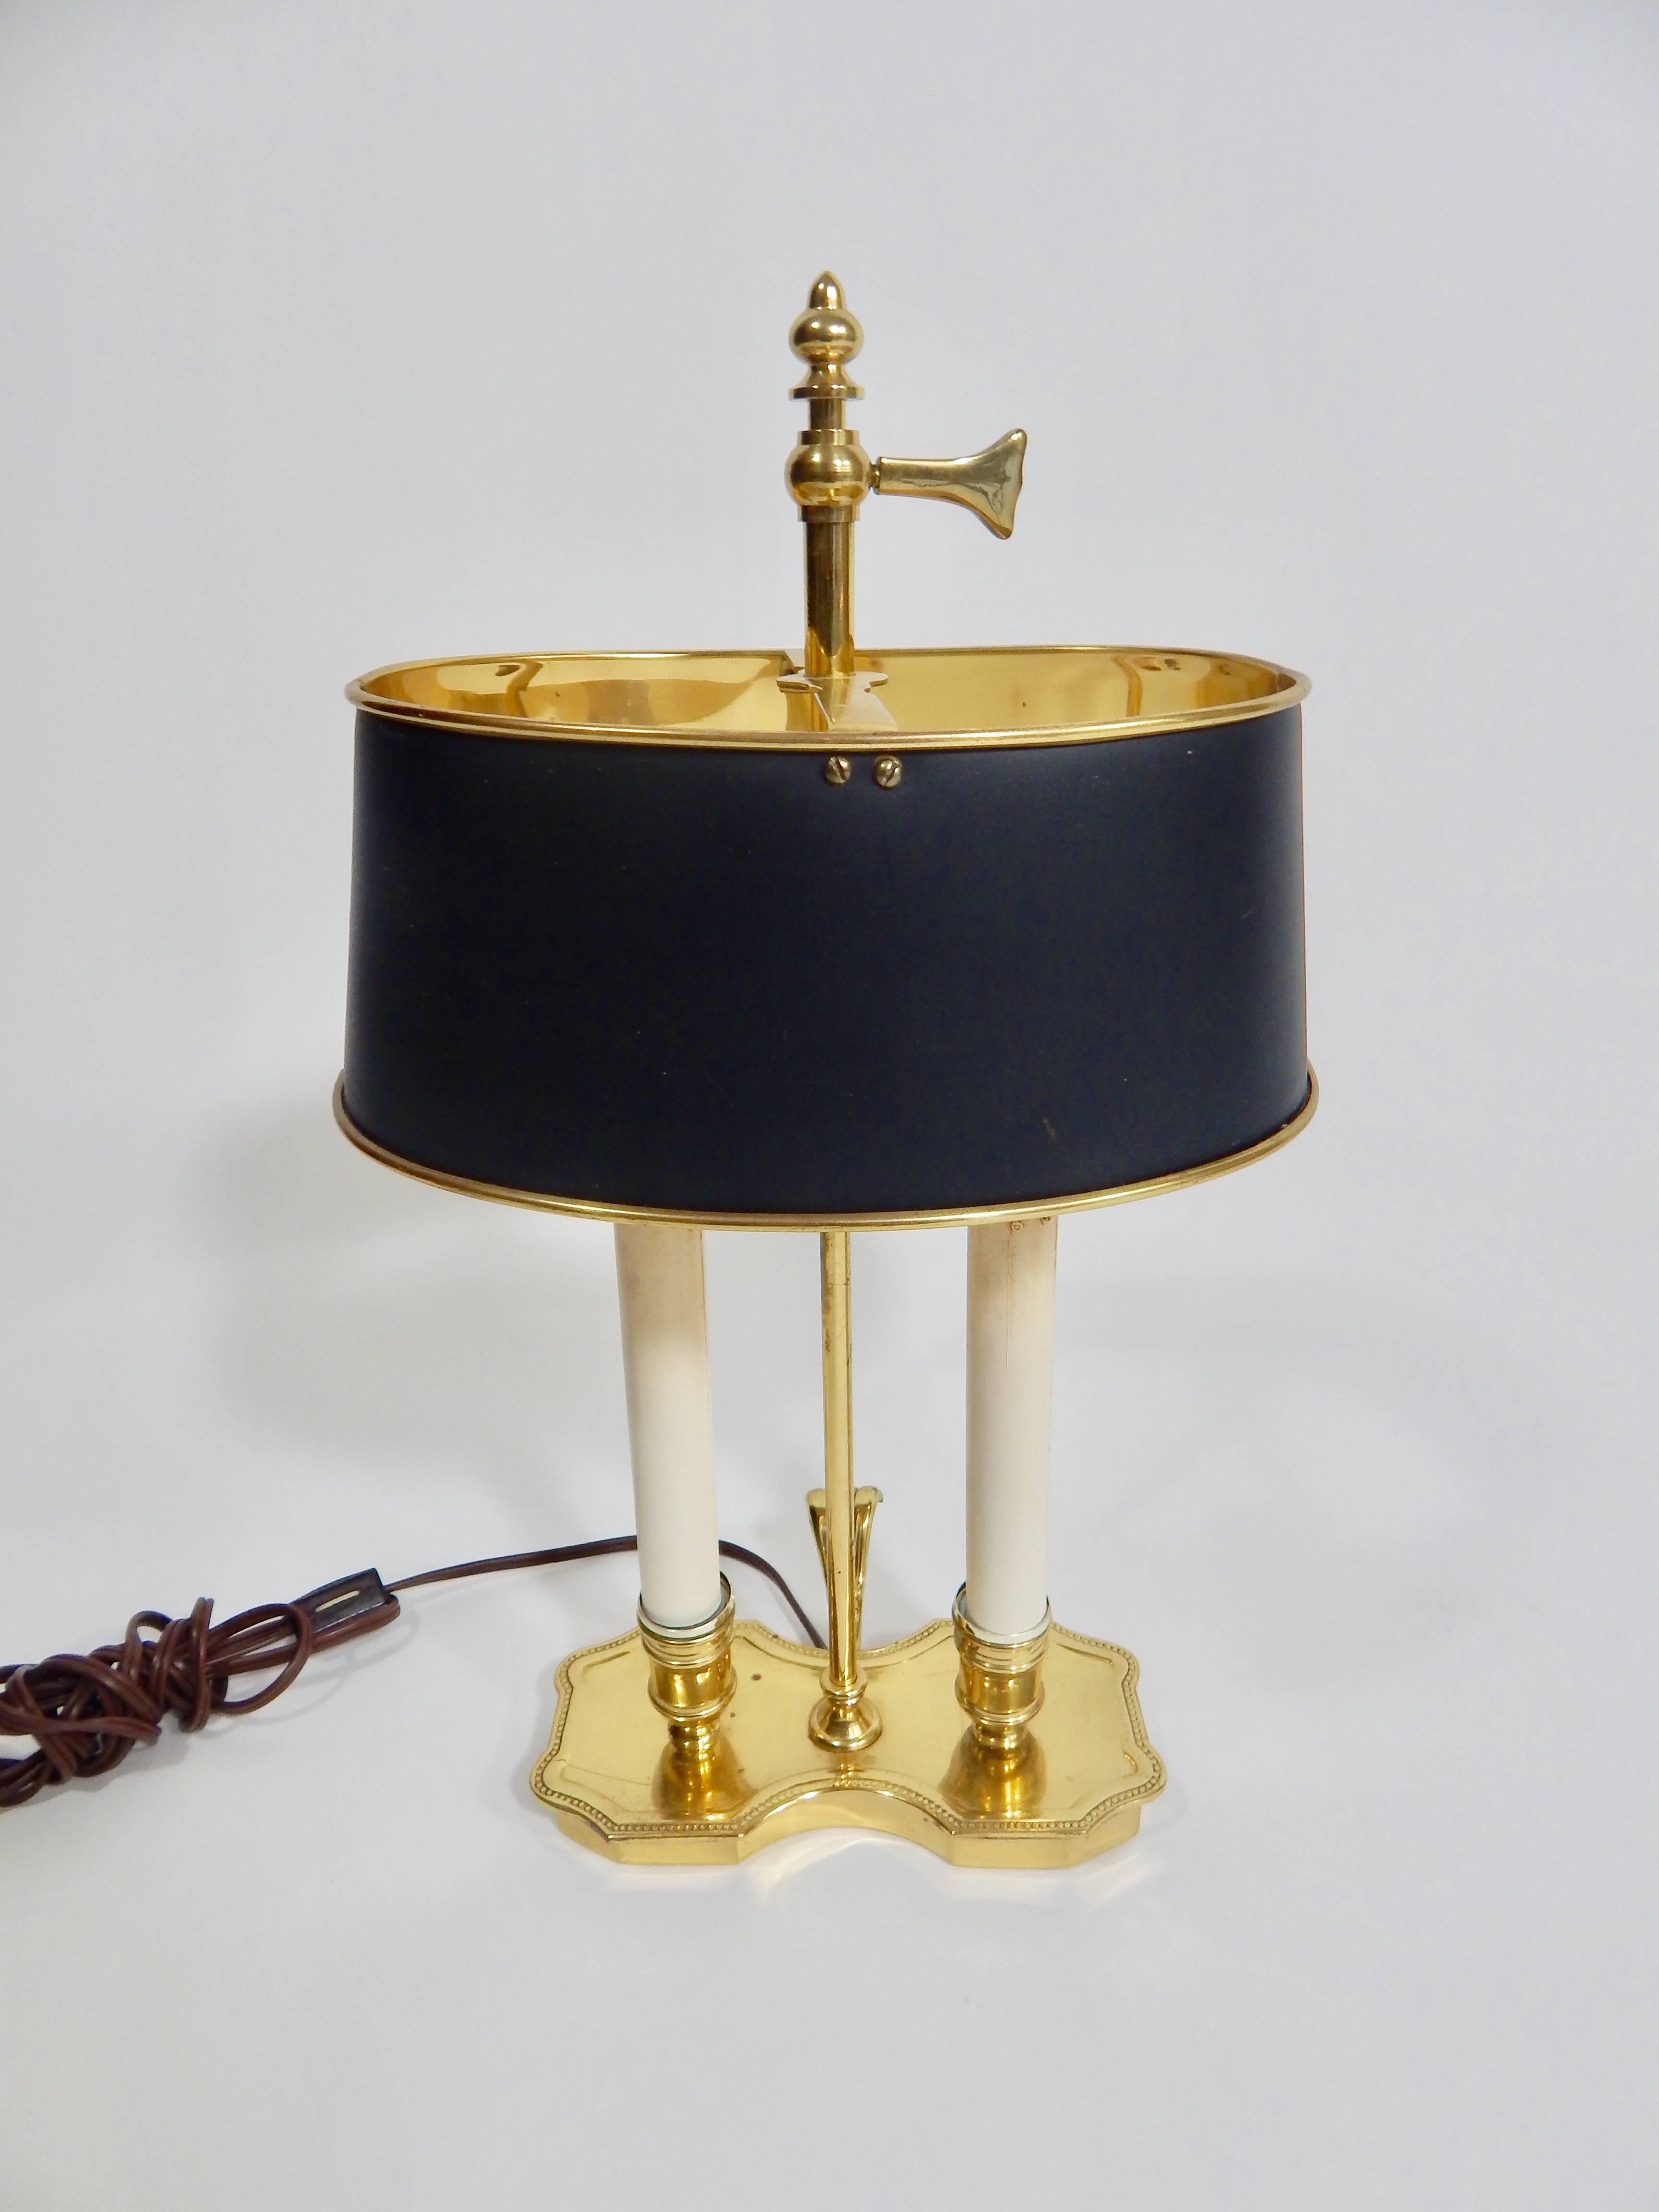 Midcentury, 1960s cute brass French style Bouilette lamp. Black metal shade with gold interior. Exhibits some light wear on the base.